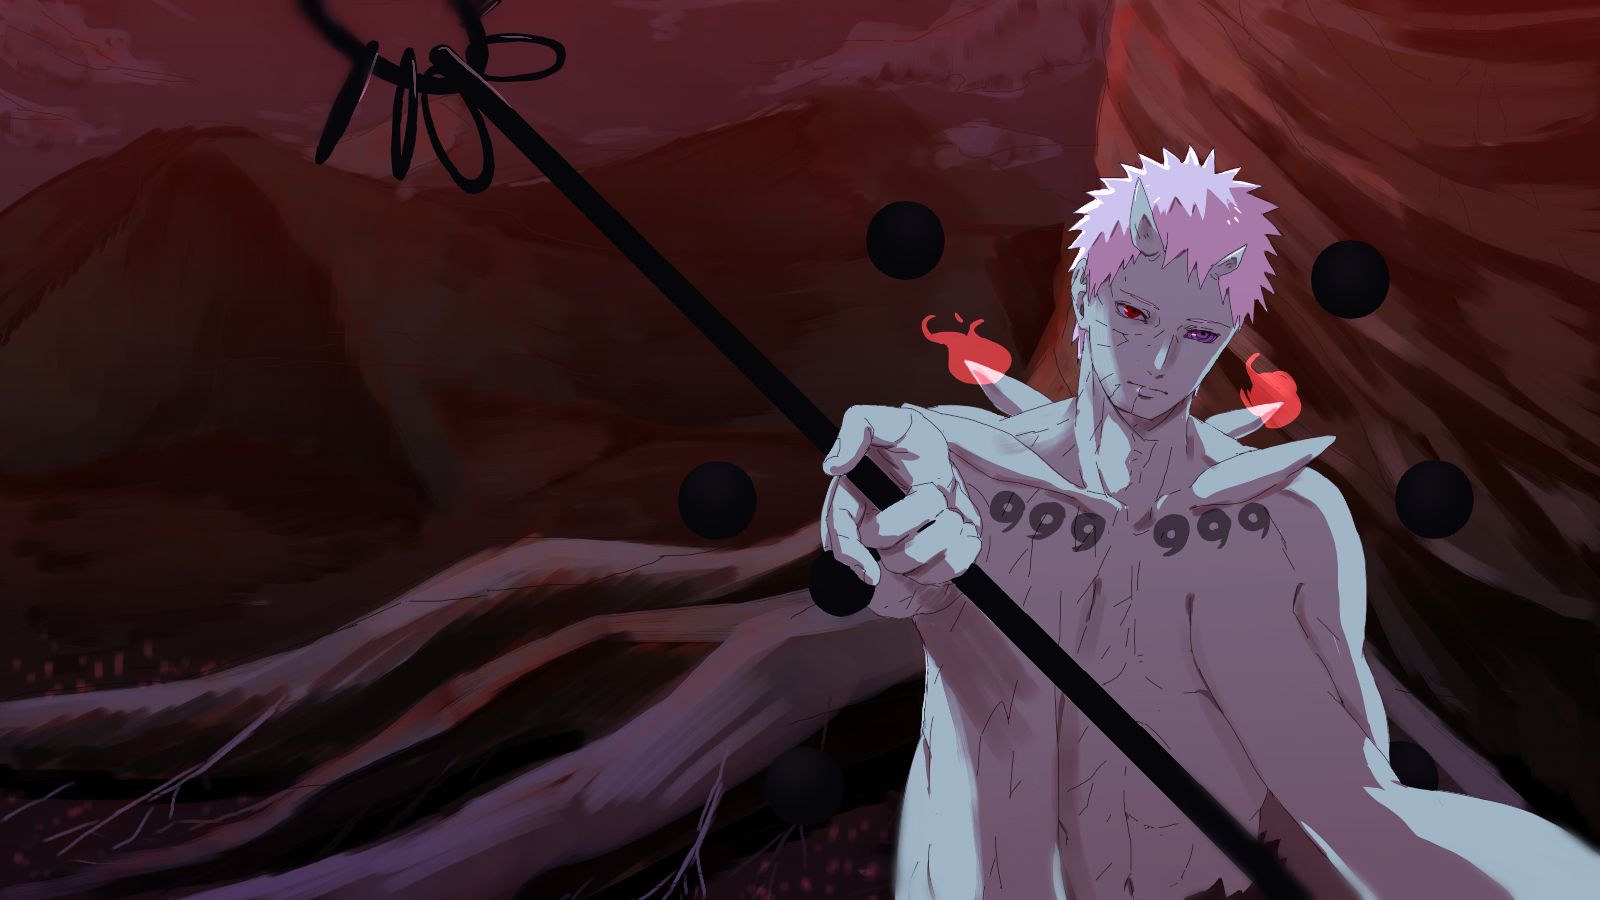 Obito Uchiha Wallpapers  Top 35 Best Obito Uchiha Backgrounds Download